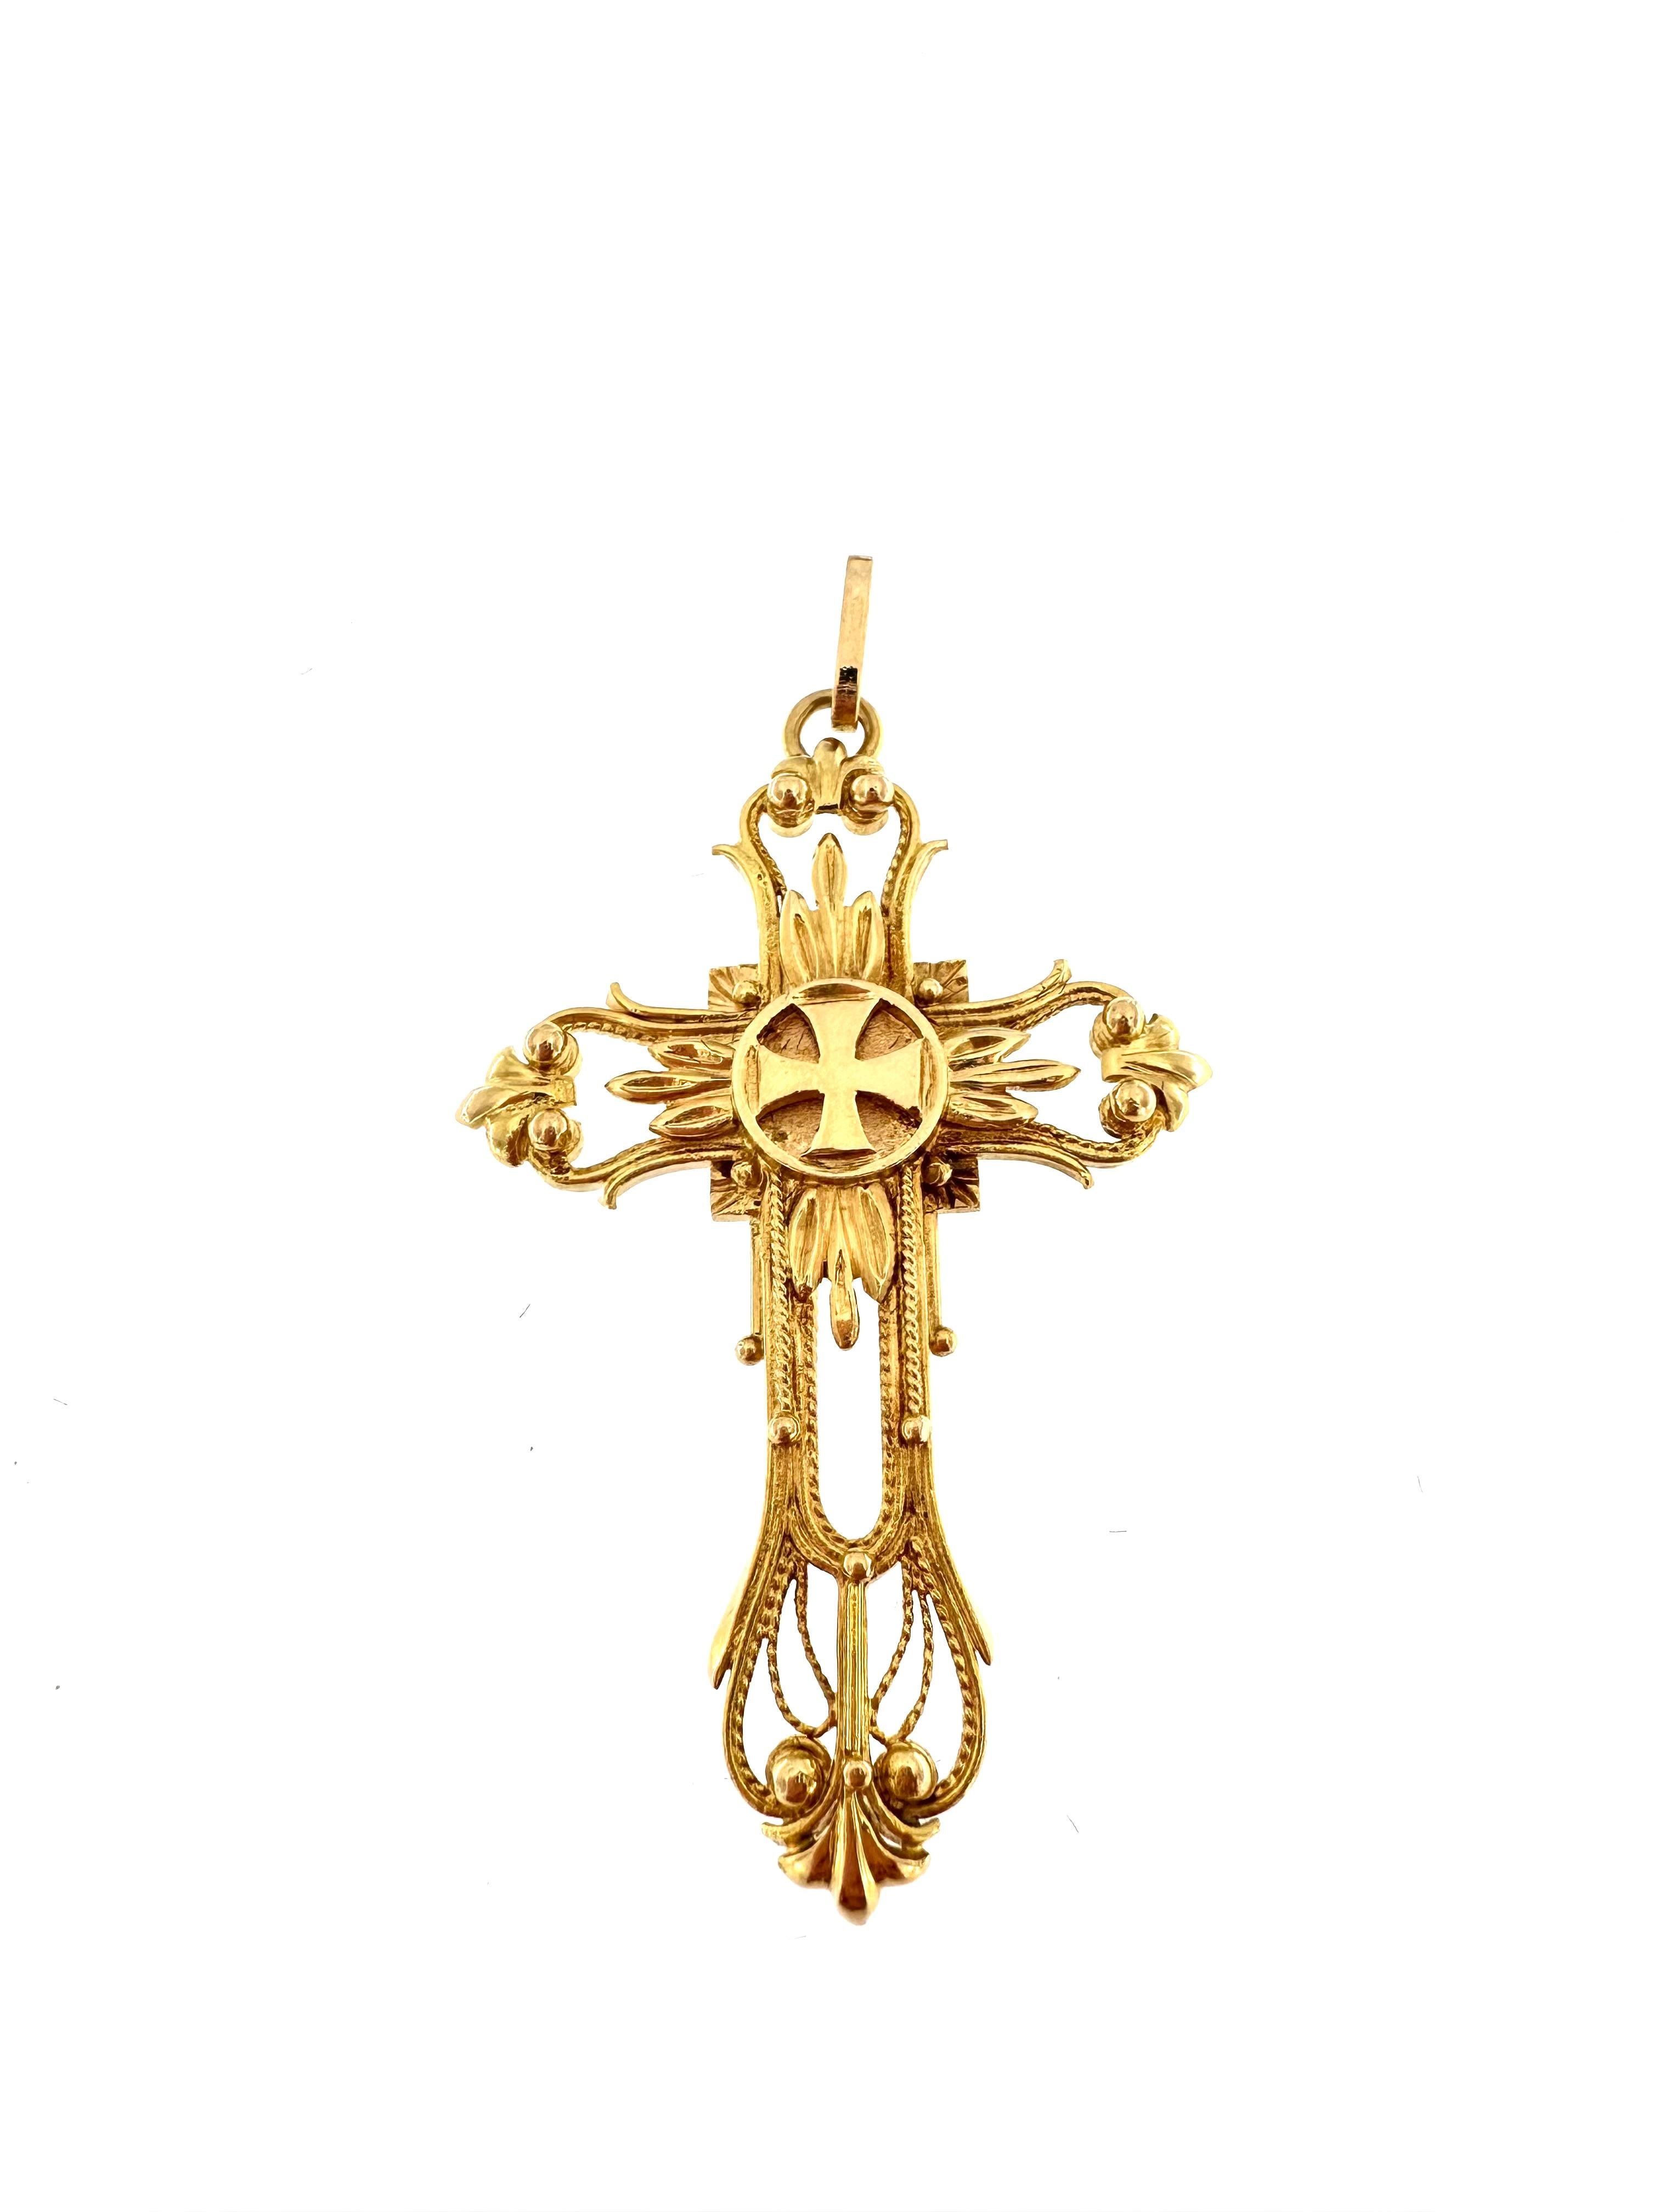 This piece impresses with its originality. While this cross is worked in the Renaissance style we can also observe the cross of the Templars positioned in the front. The whole pendant is fully decorated and is studied in detail. This pendant is in